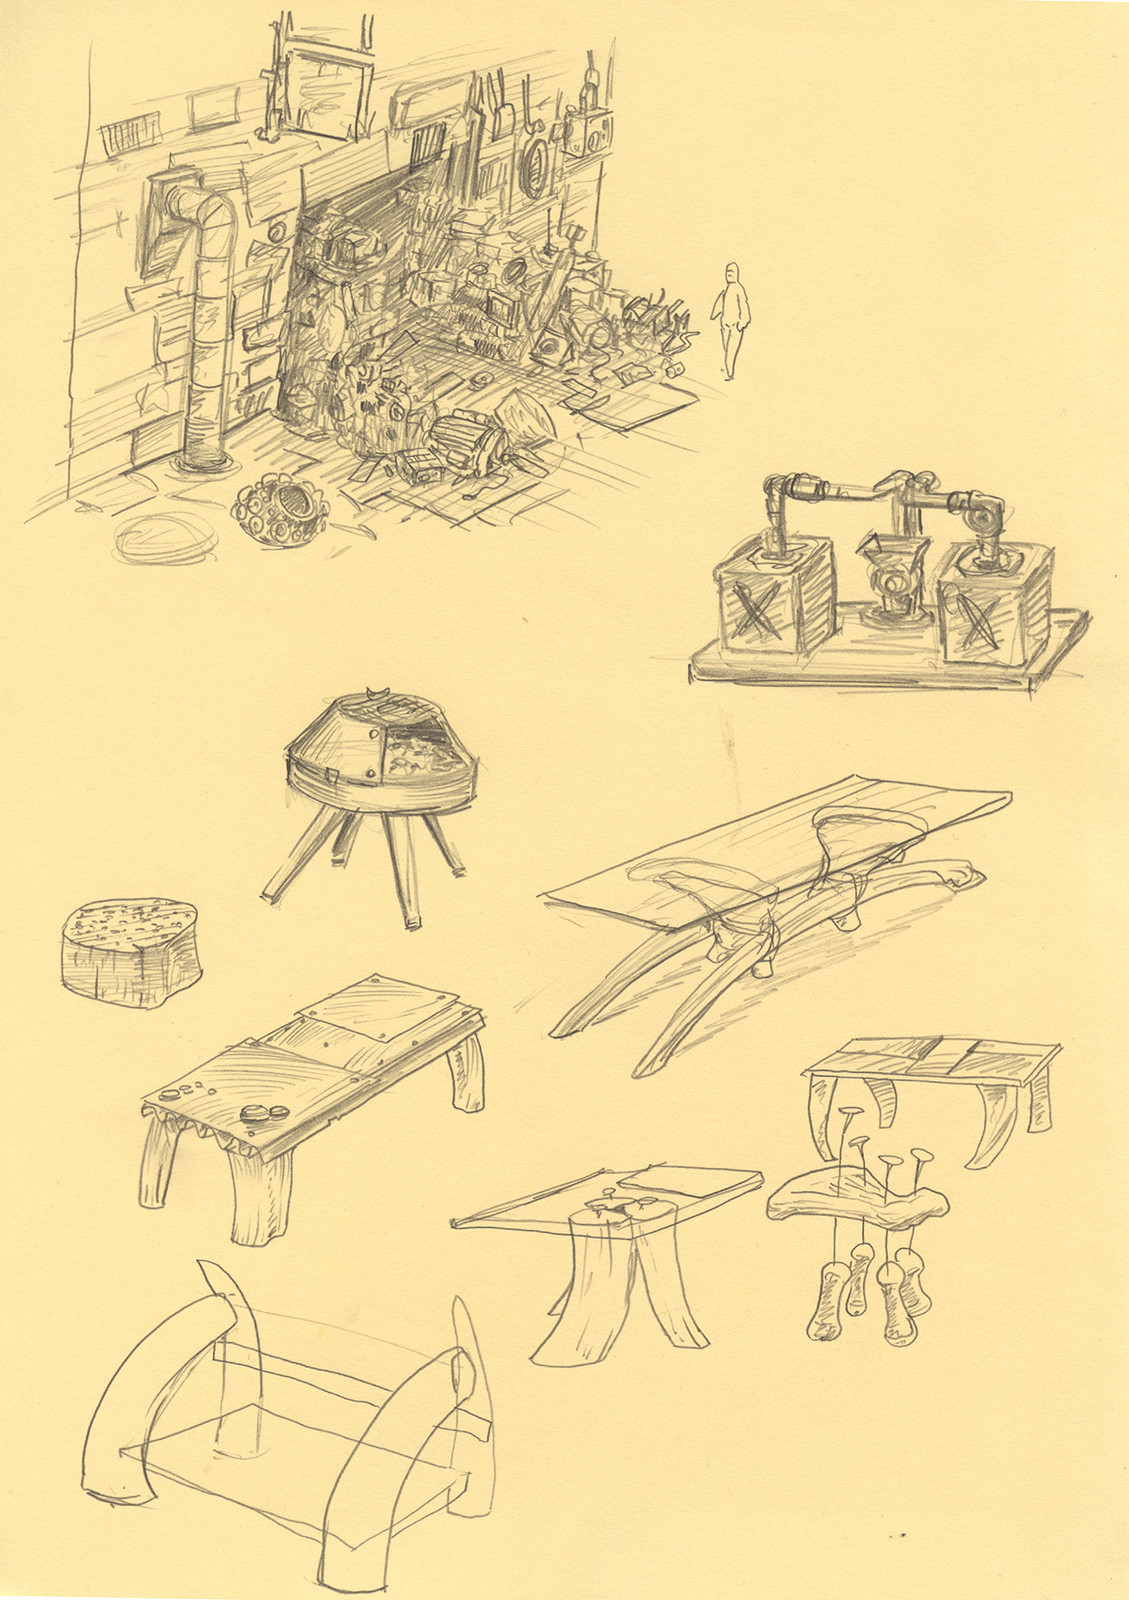 Concepts of furniture made of bones and an early design for the scrap-metal dealer shop